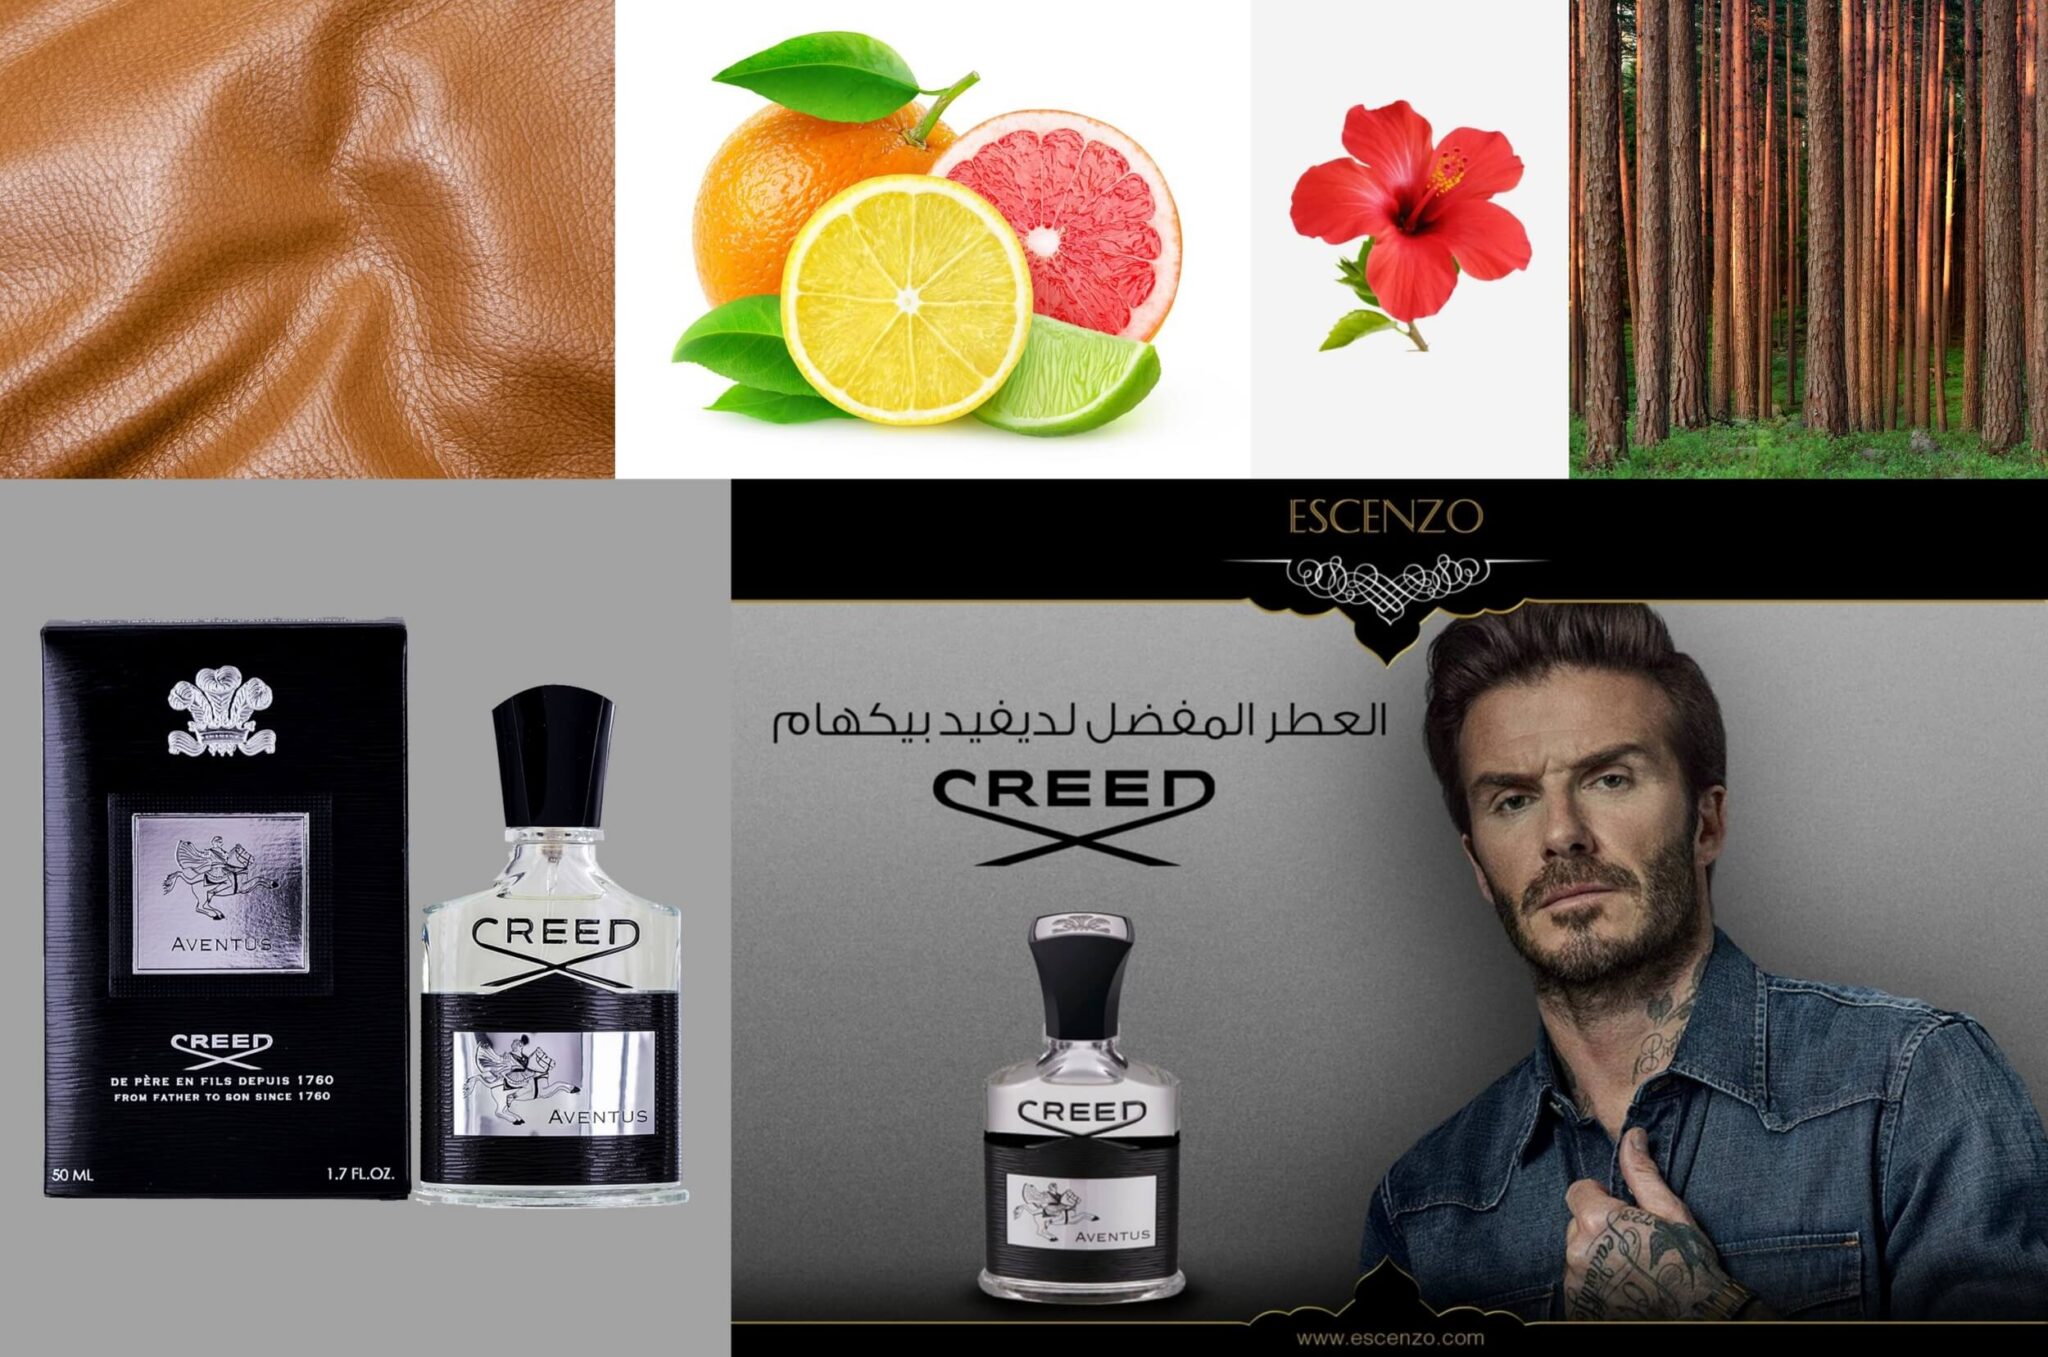 Top 10 Best Perfumes / Cologne For Men In The World | Top Ten Lists